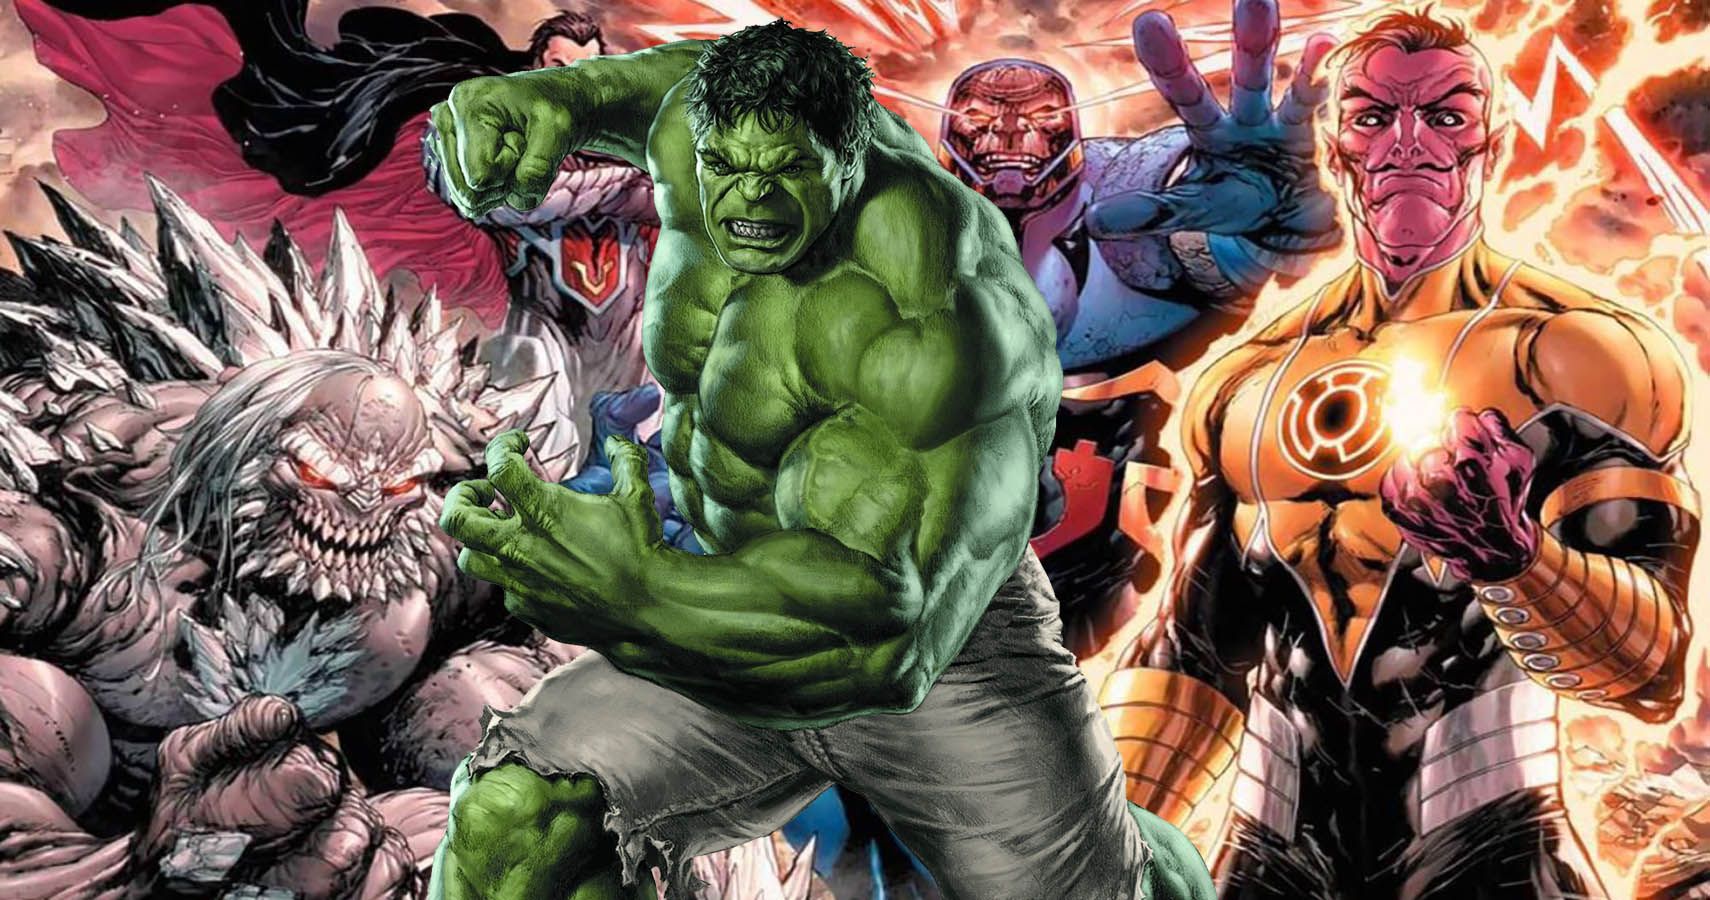 What's your review of Immortal Hulk #36? - Quora